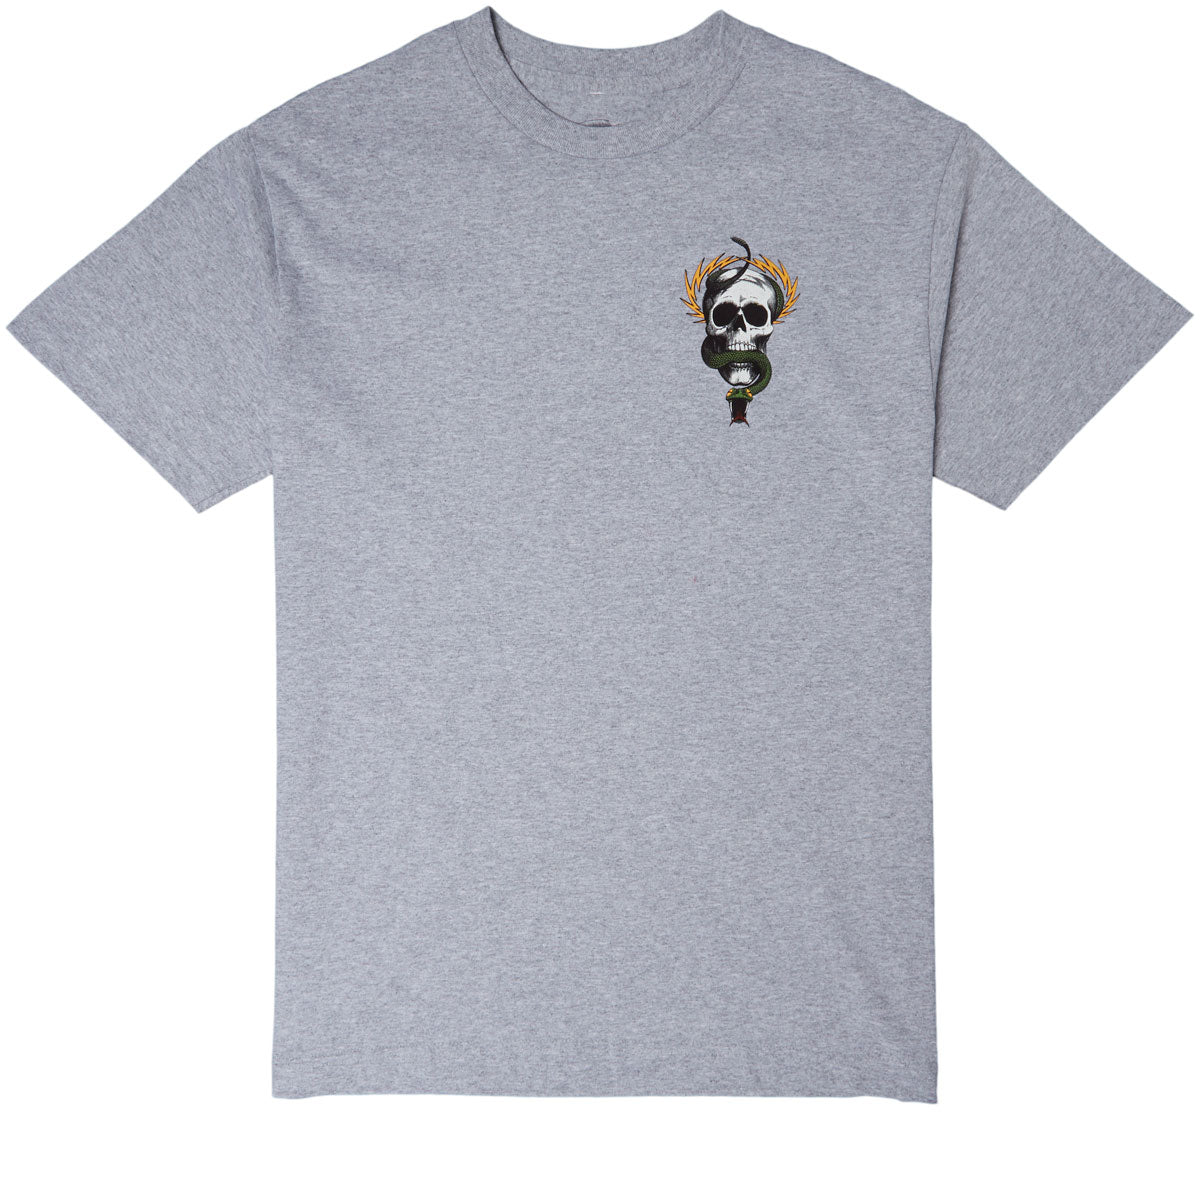 Powell-Peralta McGill Skull and Snake T-Shirt - Athletic Heather image 1